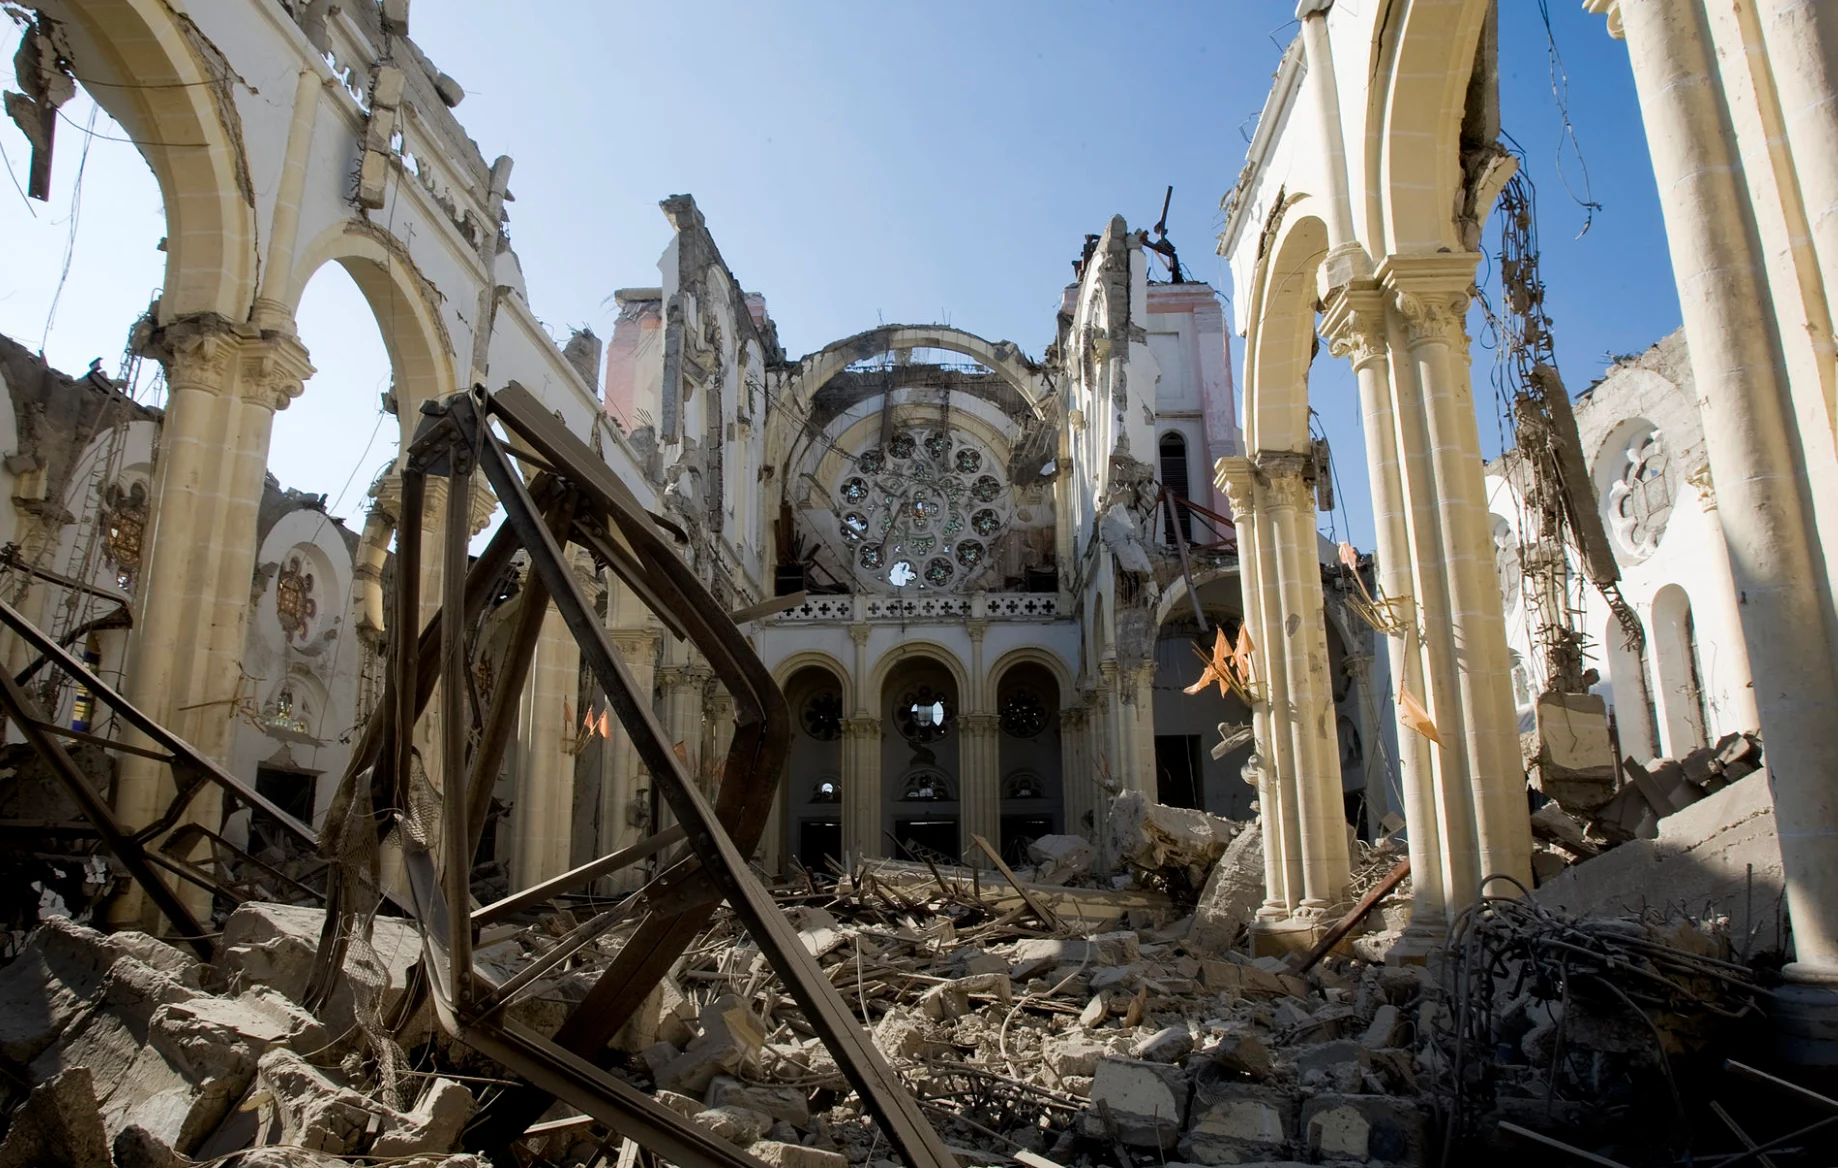 Remnants of the Cathedral of Our Lady of the Assumption after its collapse